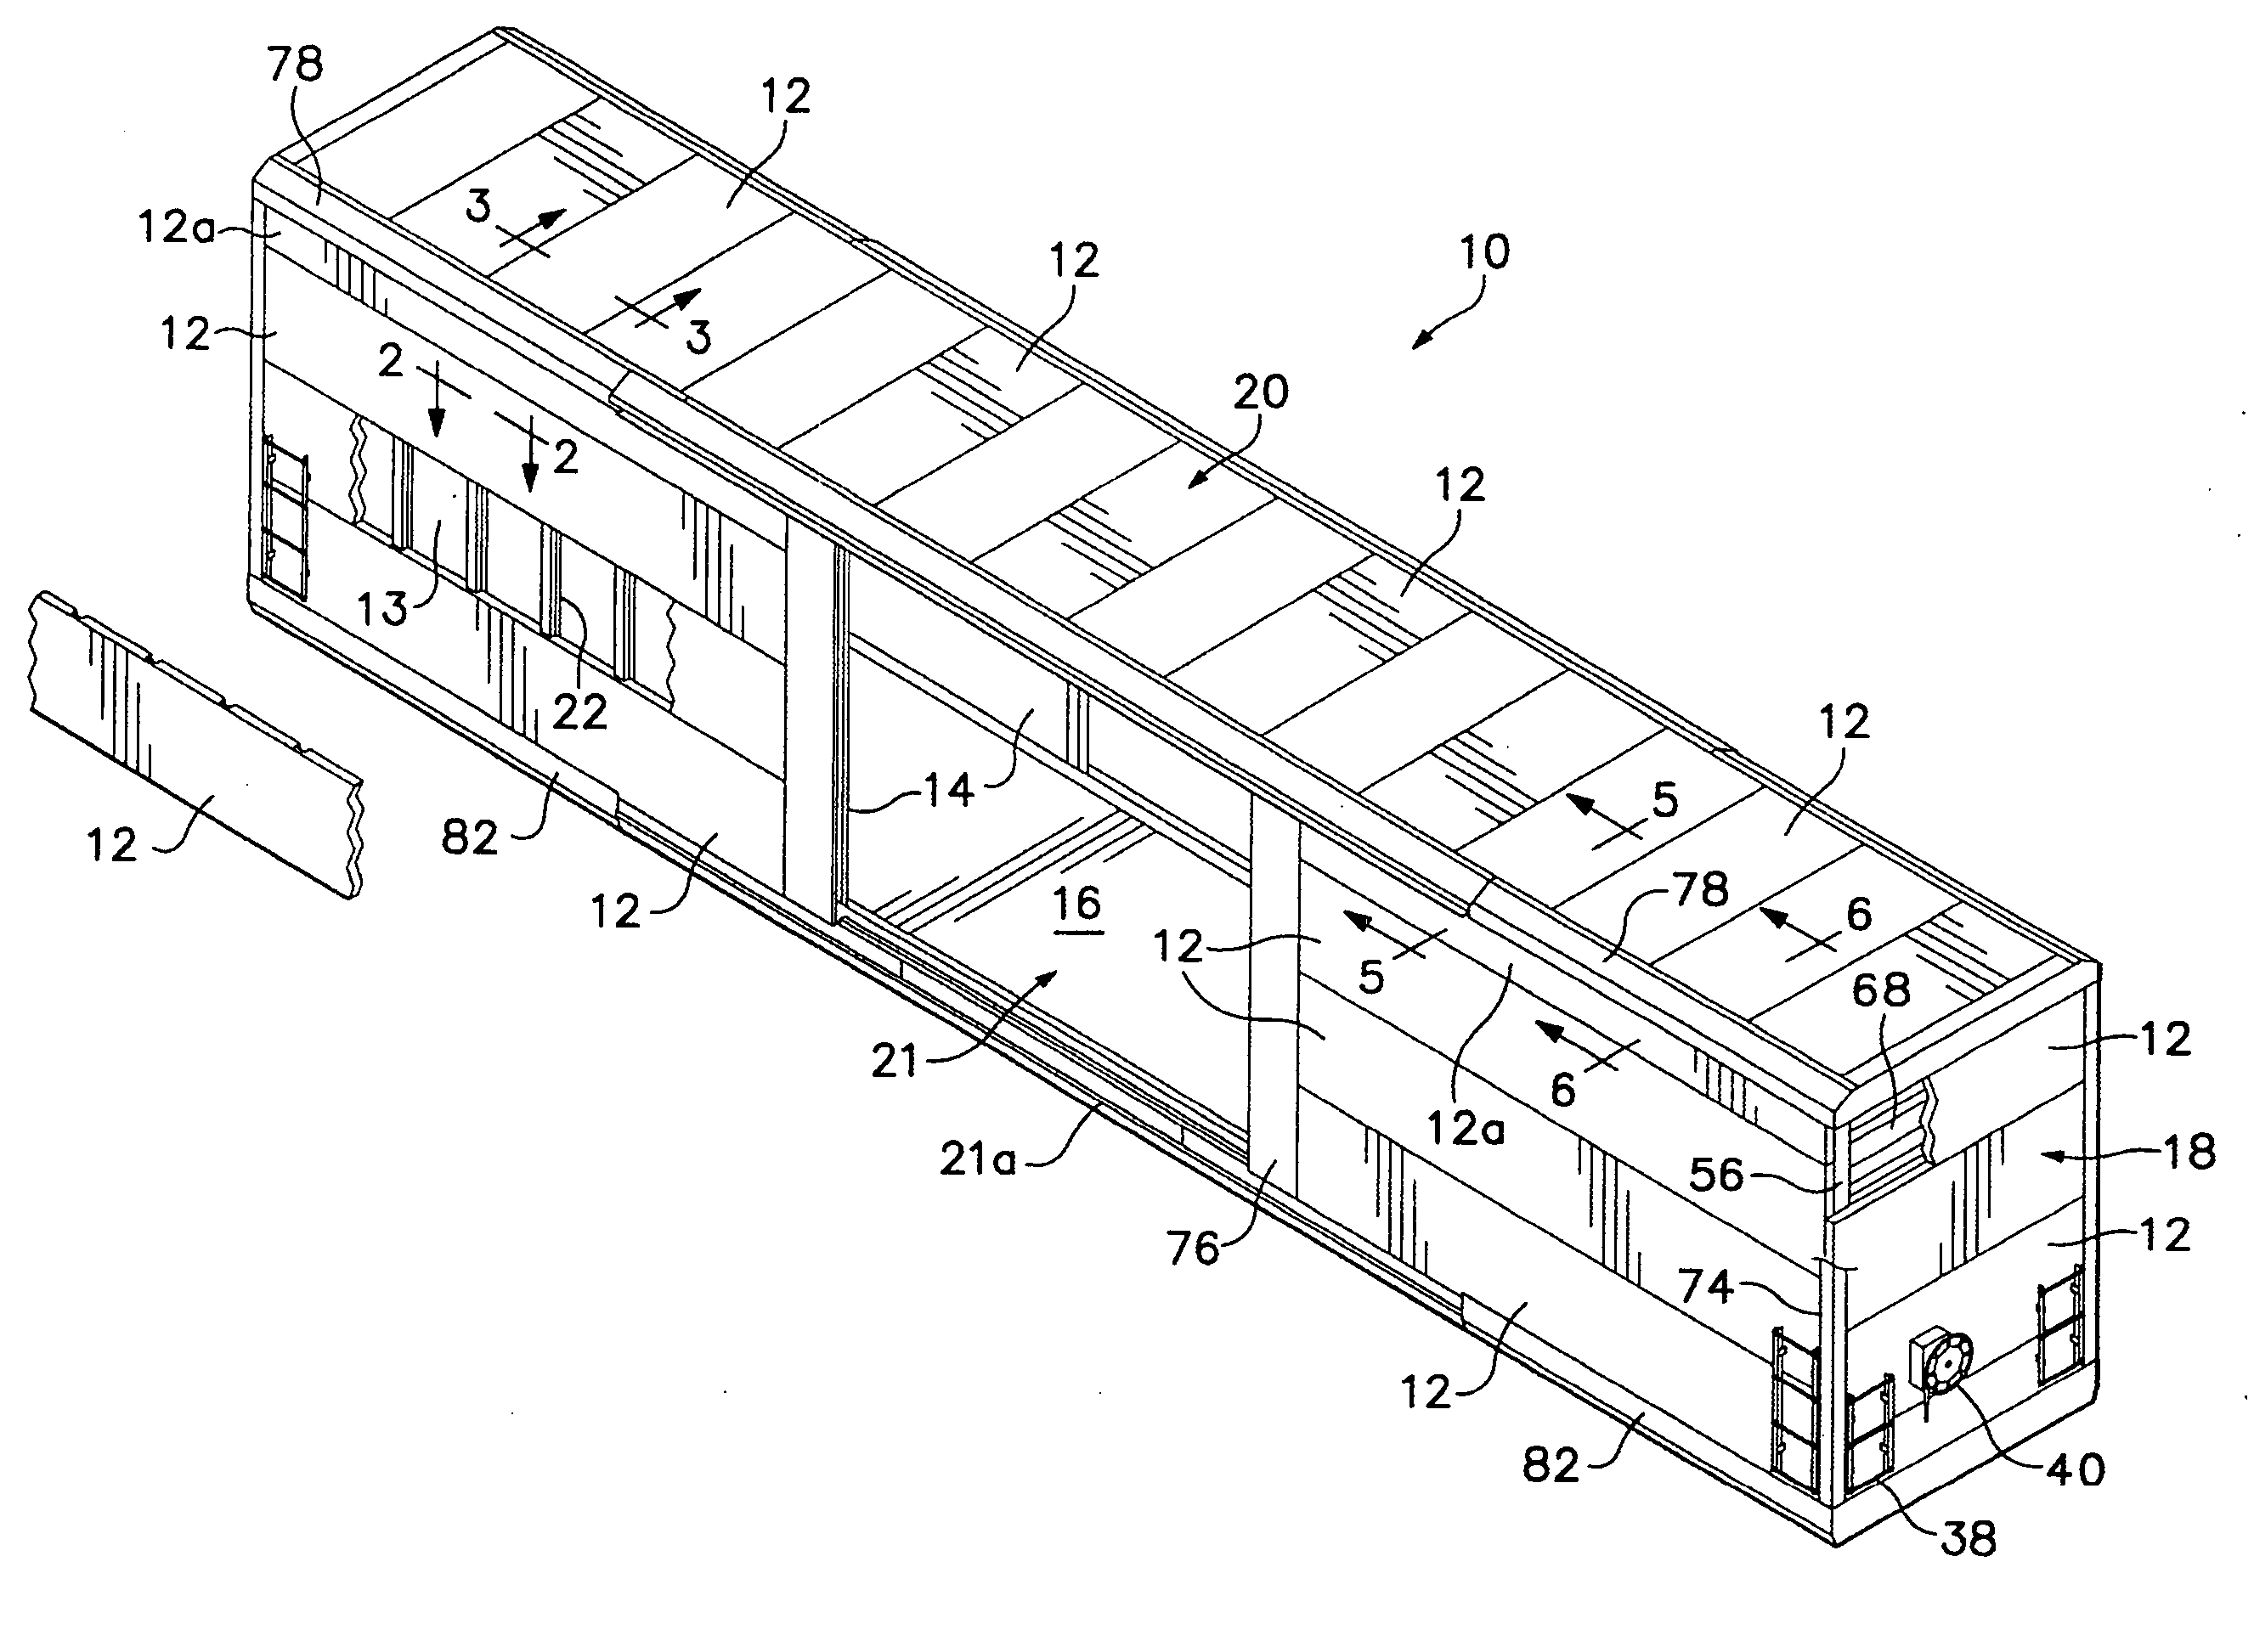 Insulative panels for a railway boxcar